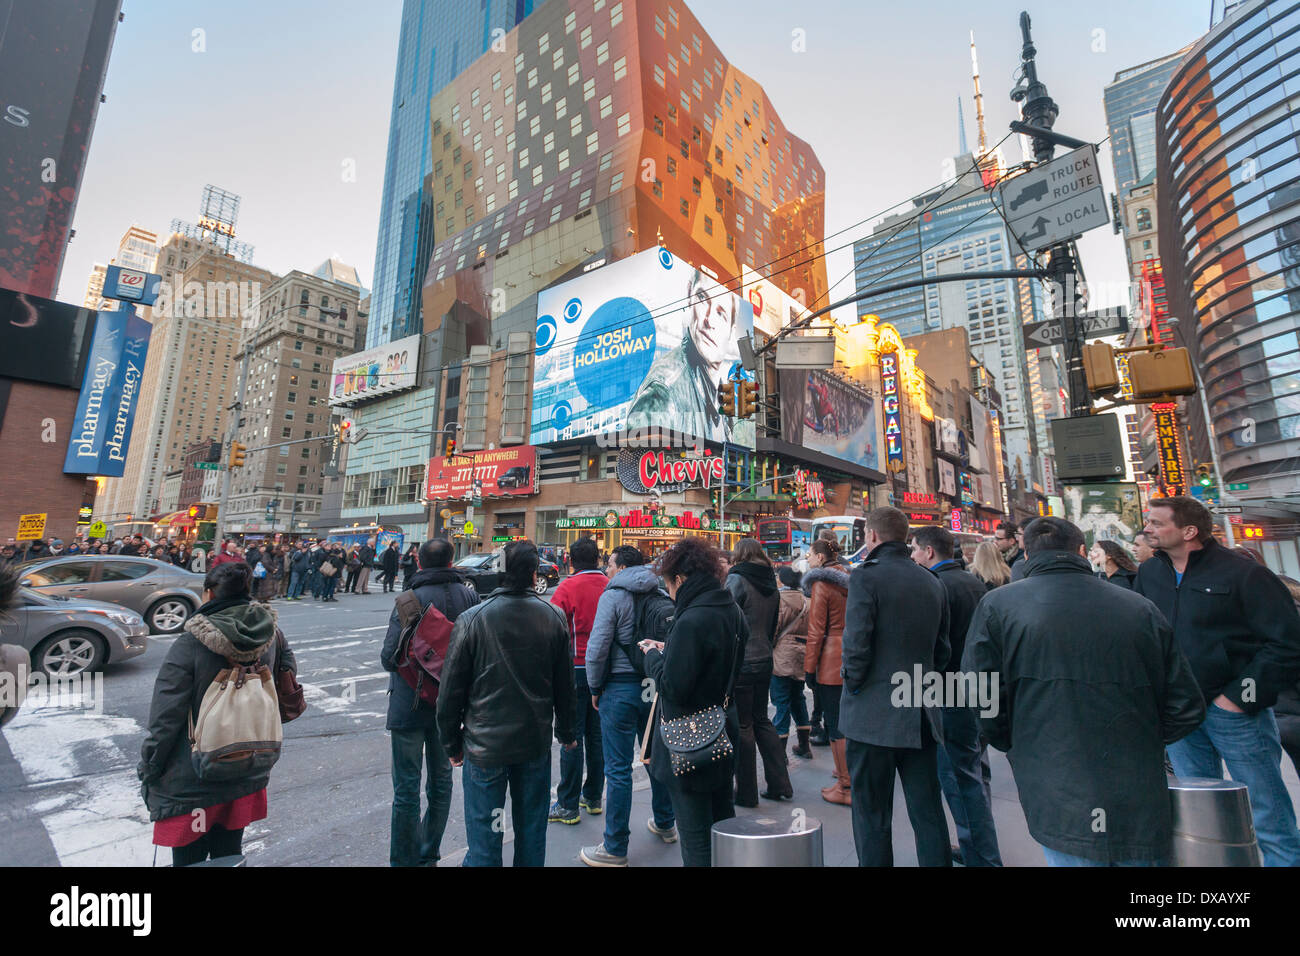 An electronic billboard in Times Square in New York, owned by CBS Outdoor America, shows advertising for CBS television programs Stock Photo